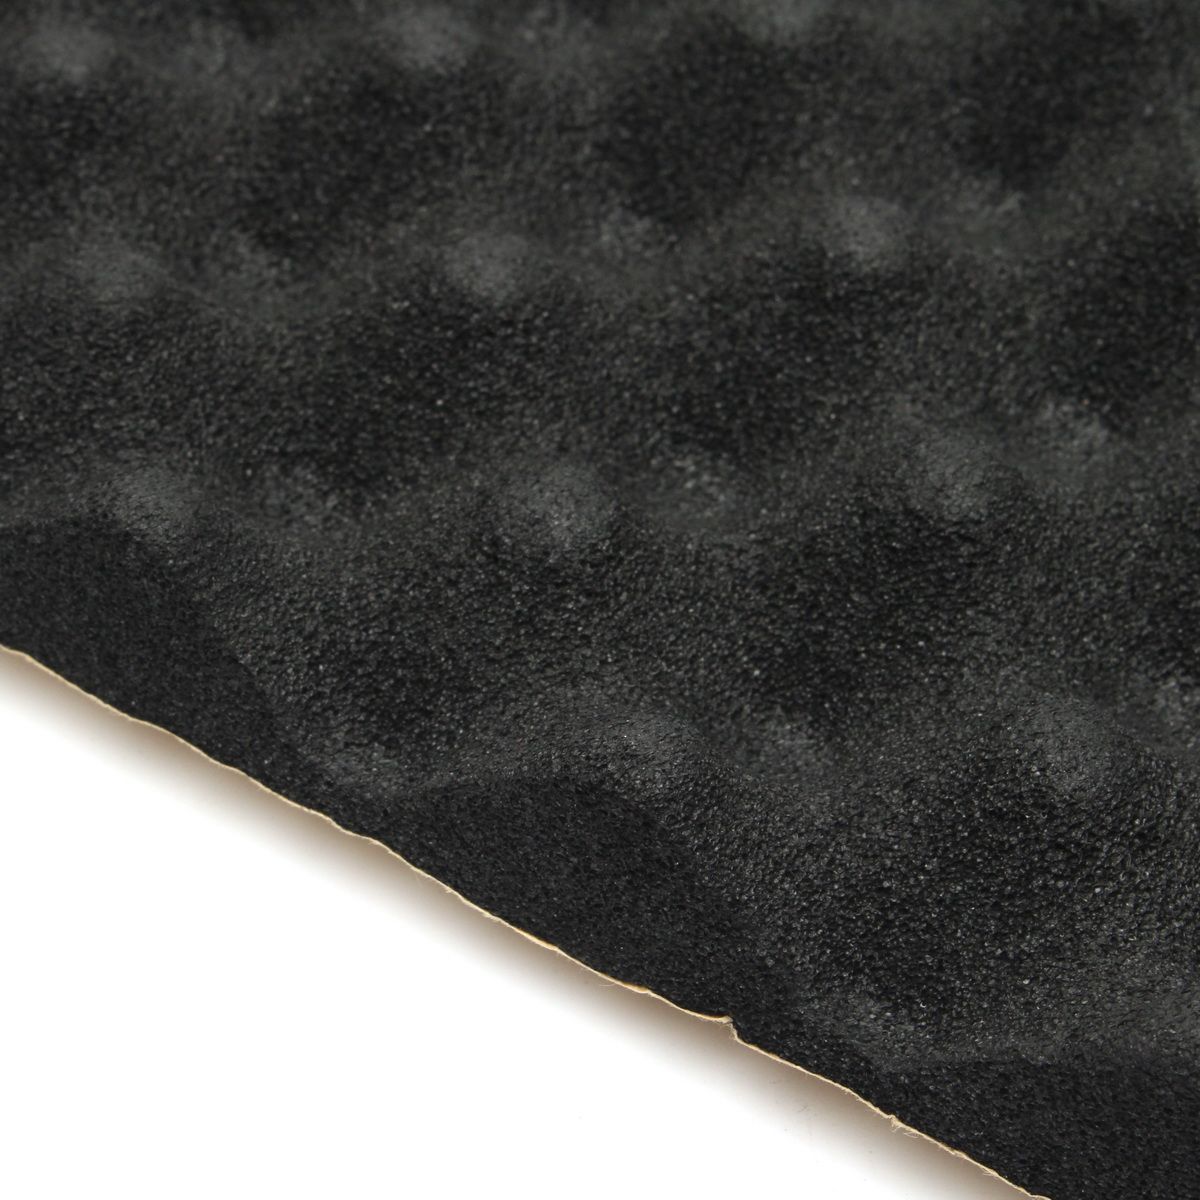 20mm-Sound-Absorber-Acoustic-Foam-Self-adhesive-for-Studio-50x50cm-1129735